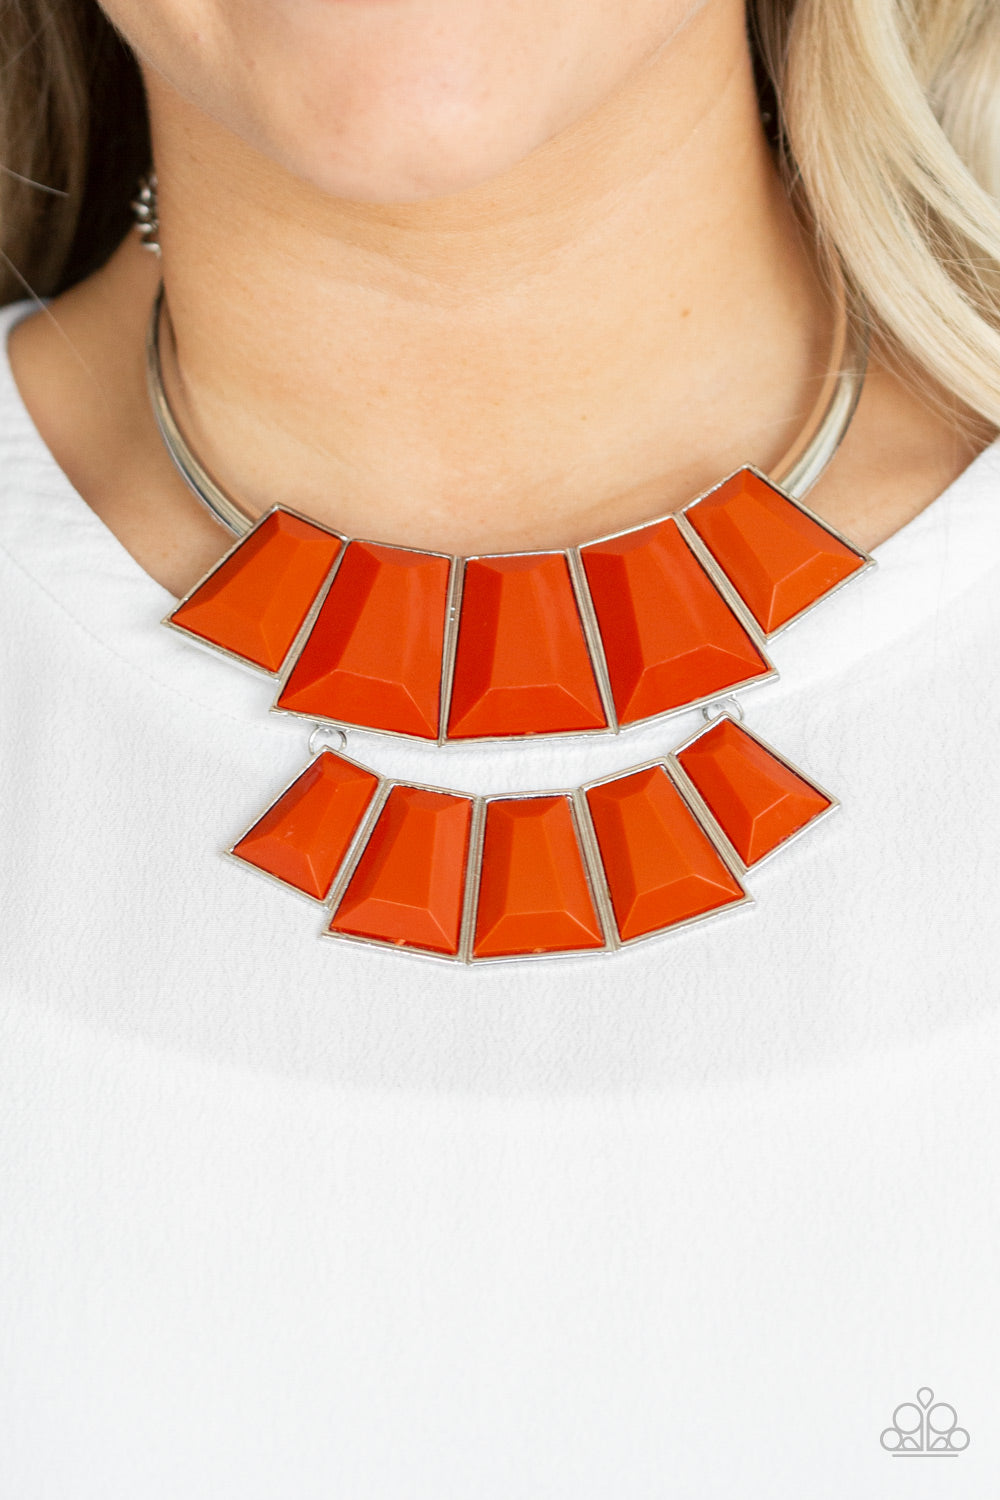 Lions, TIGRESS, and Bears - Orange necklace